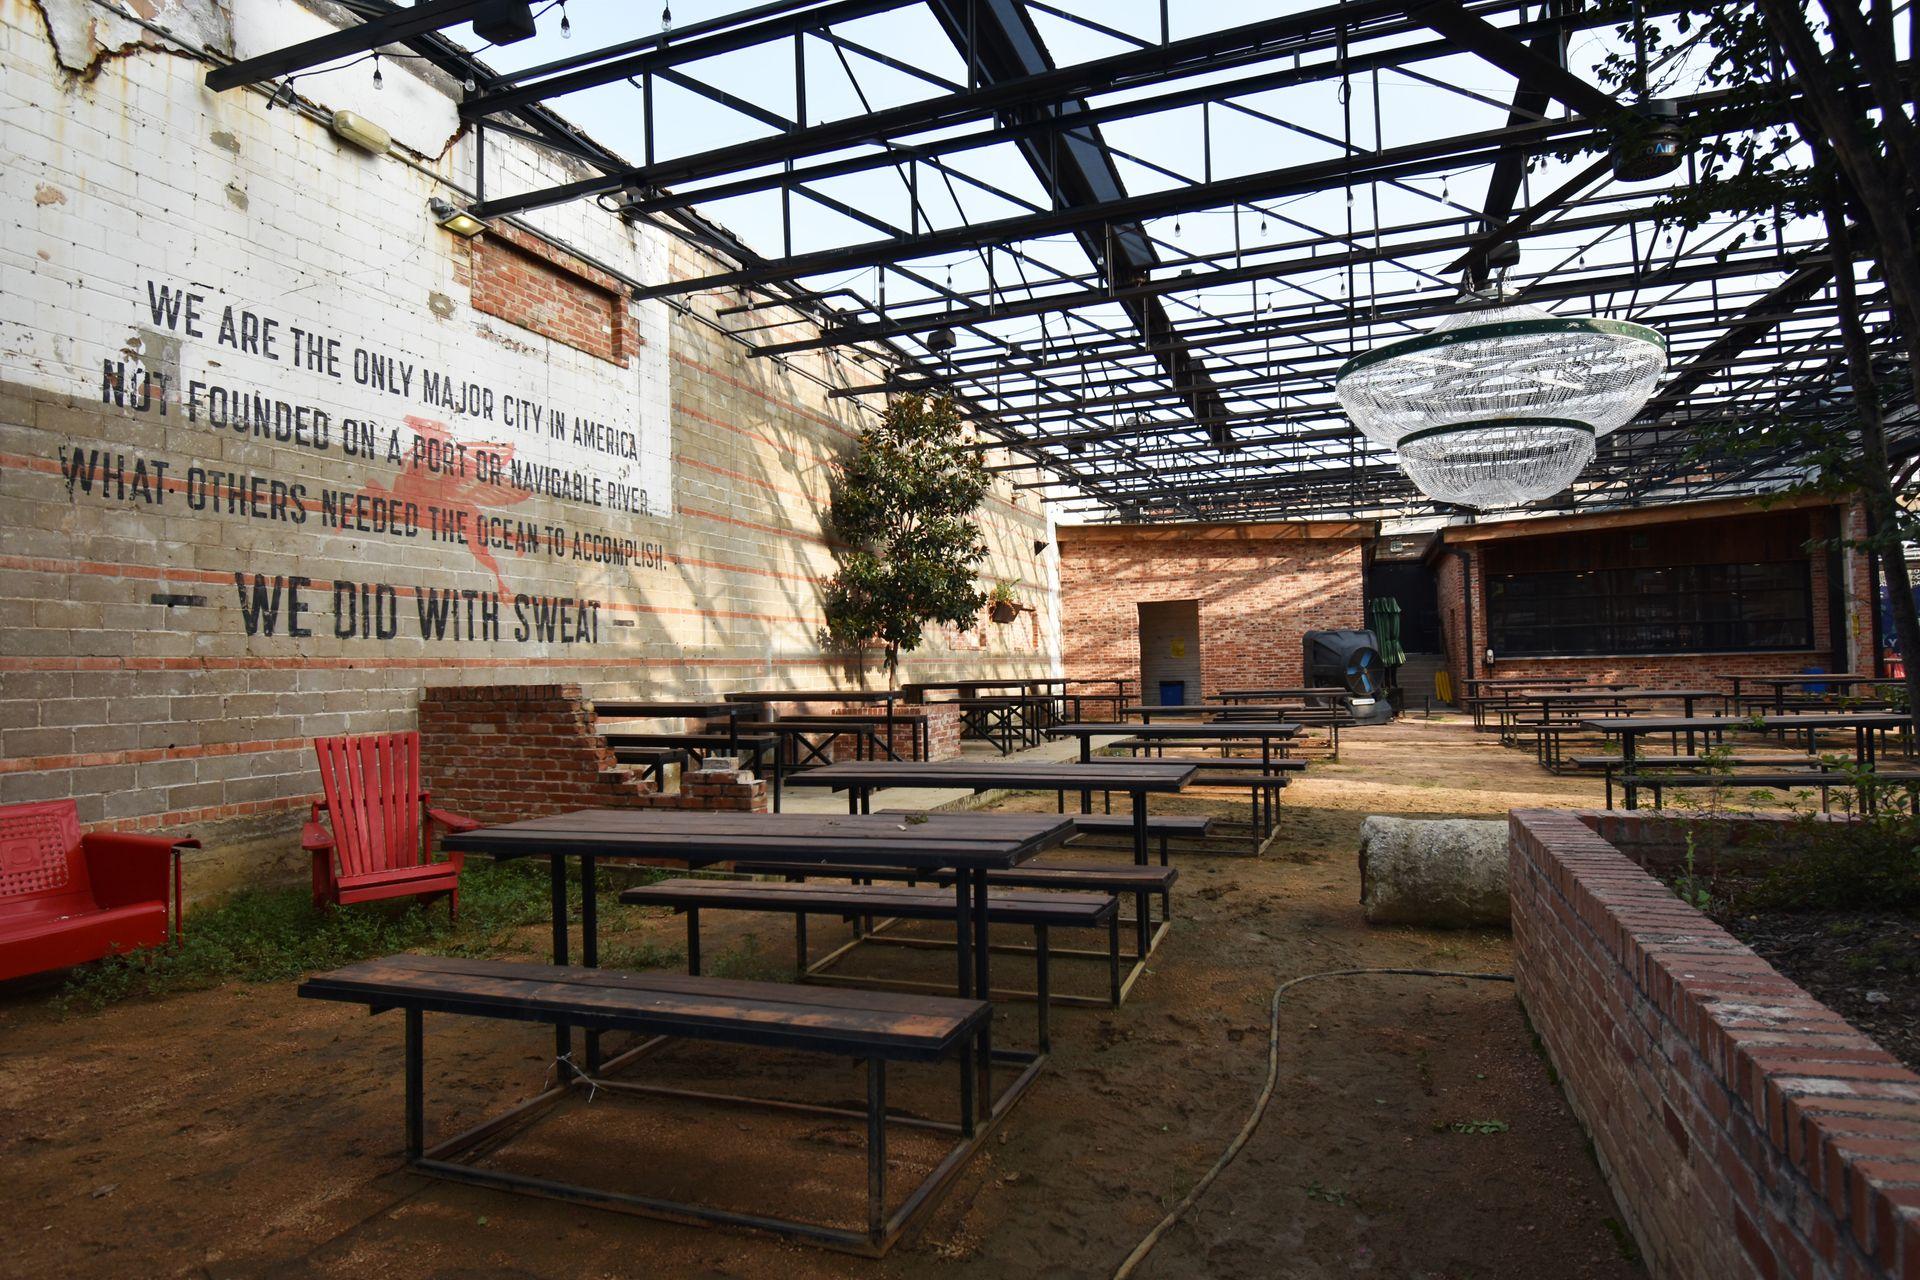 The outdoor courtyard space with several tables at Dot's. There is a quote on the wall about Dallas